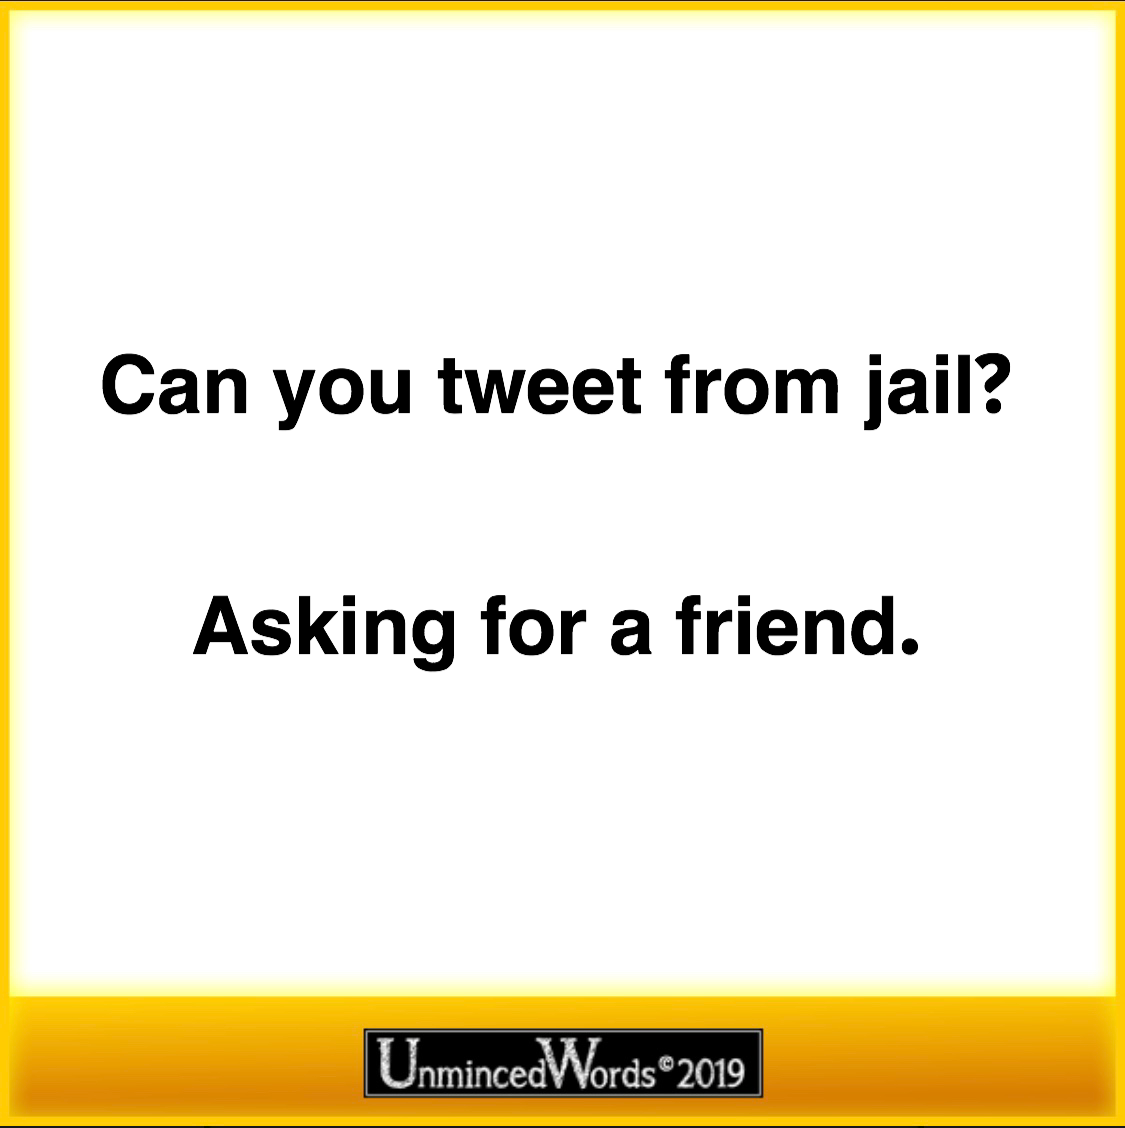 Can you tweet from jail?